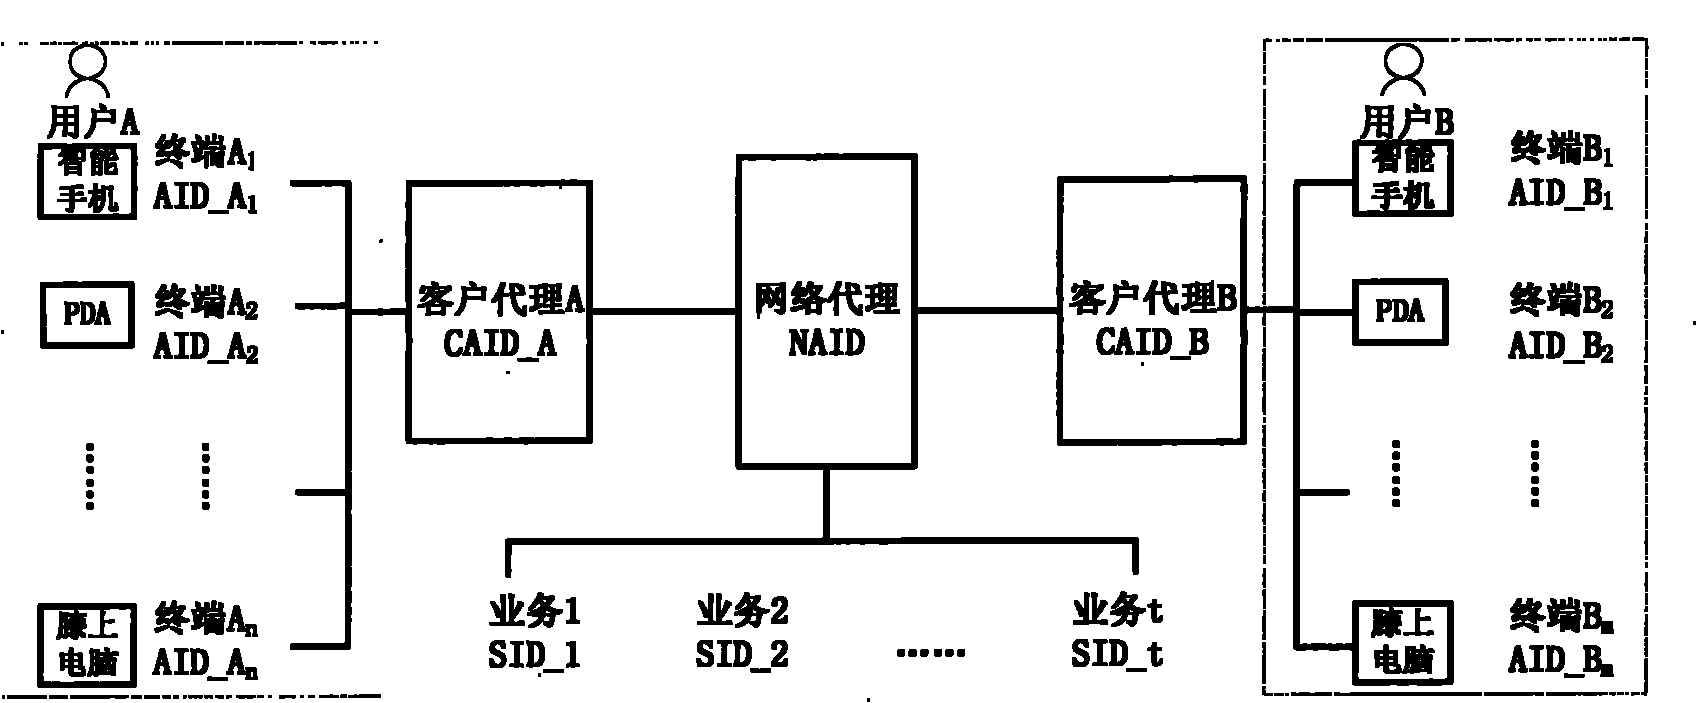 Integrated identification network personal communication mobile management method based on double-proxy